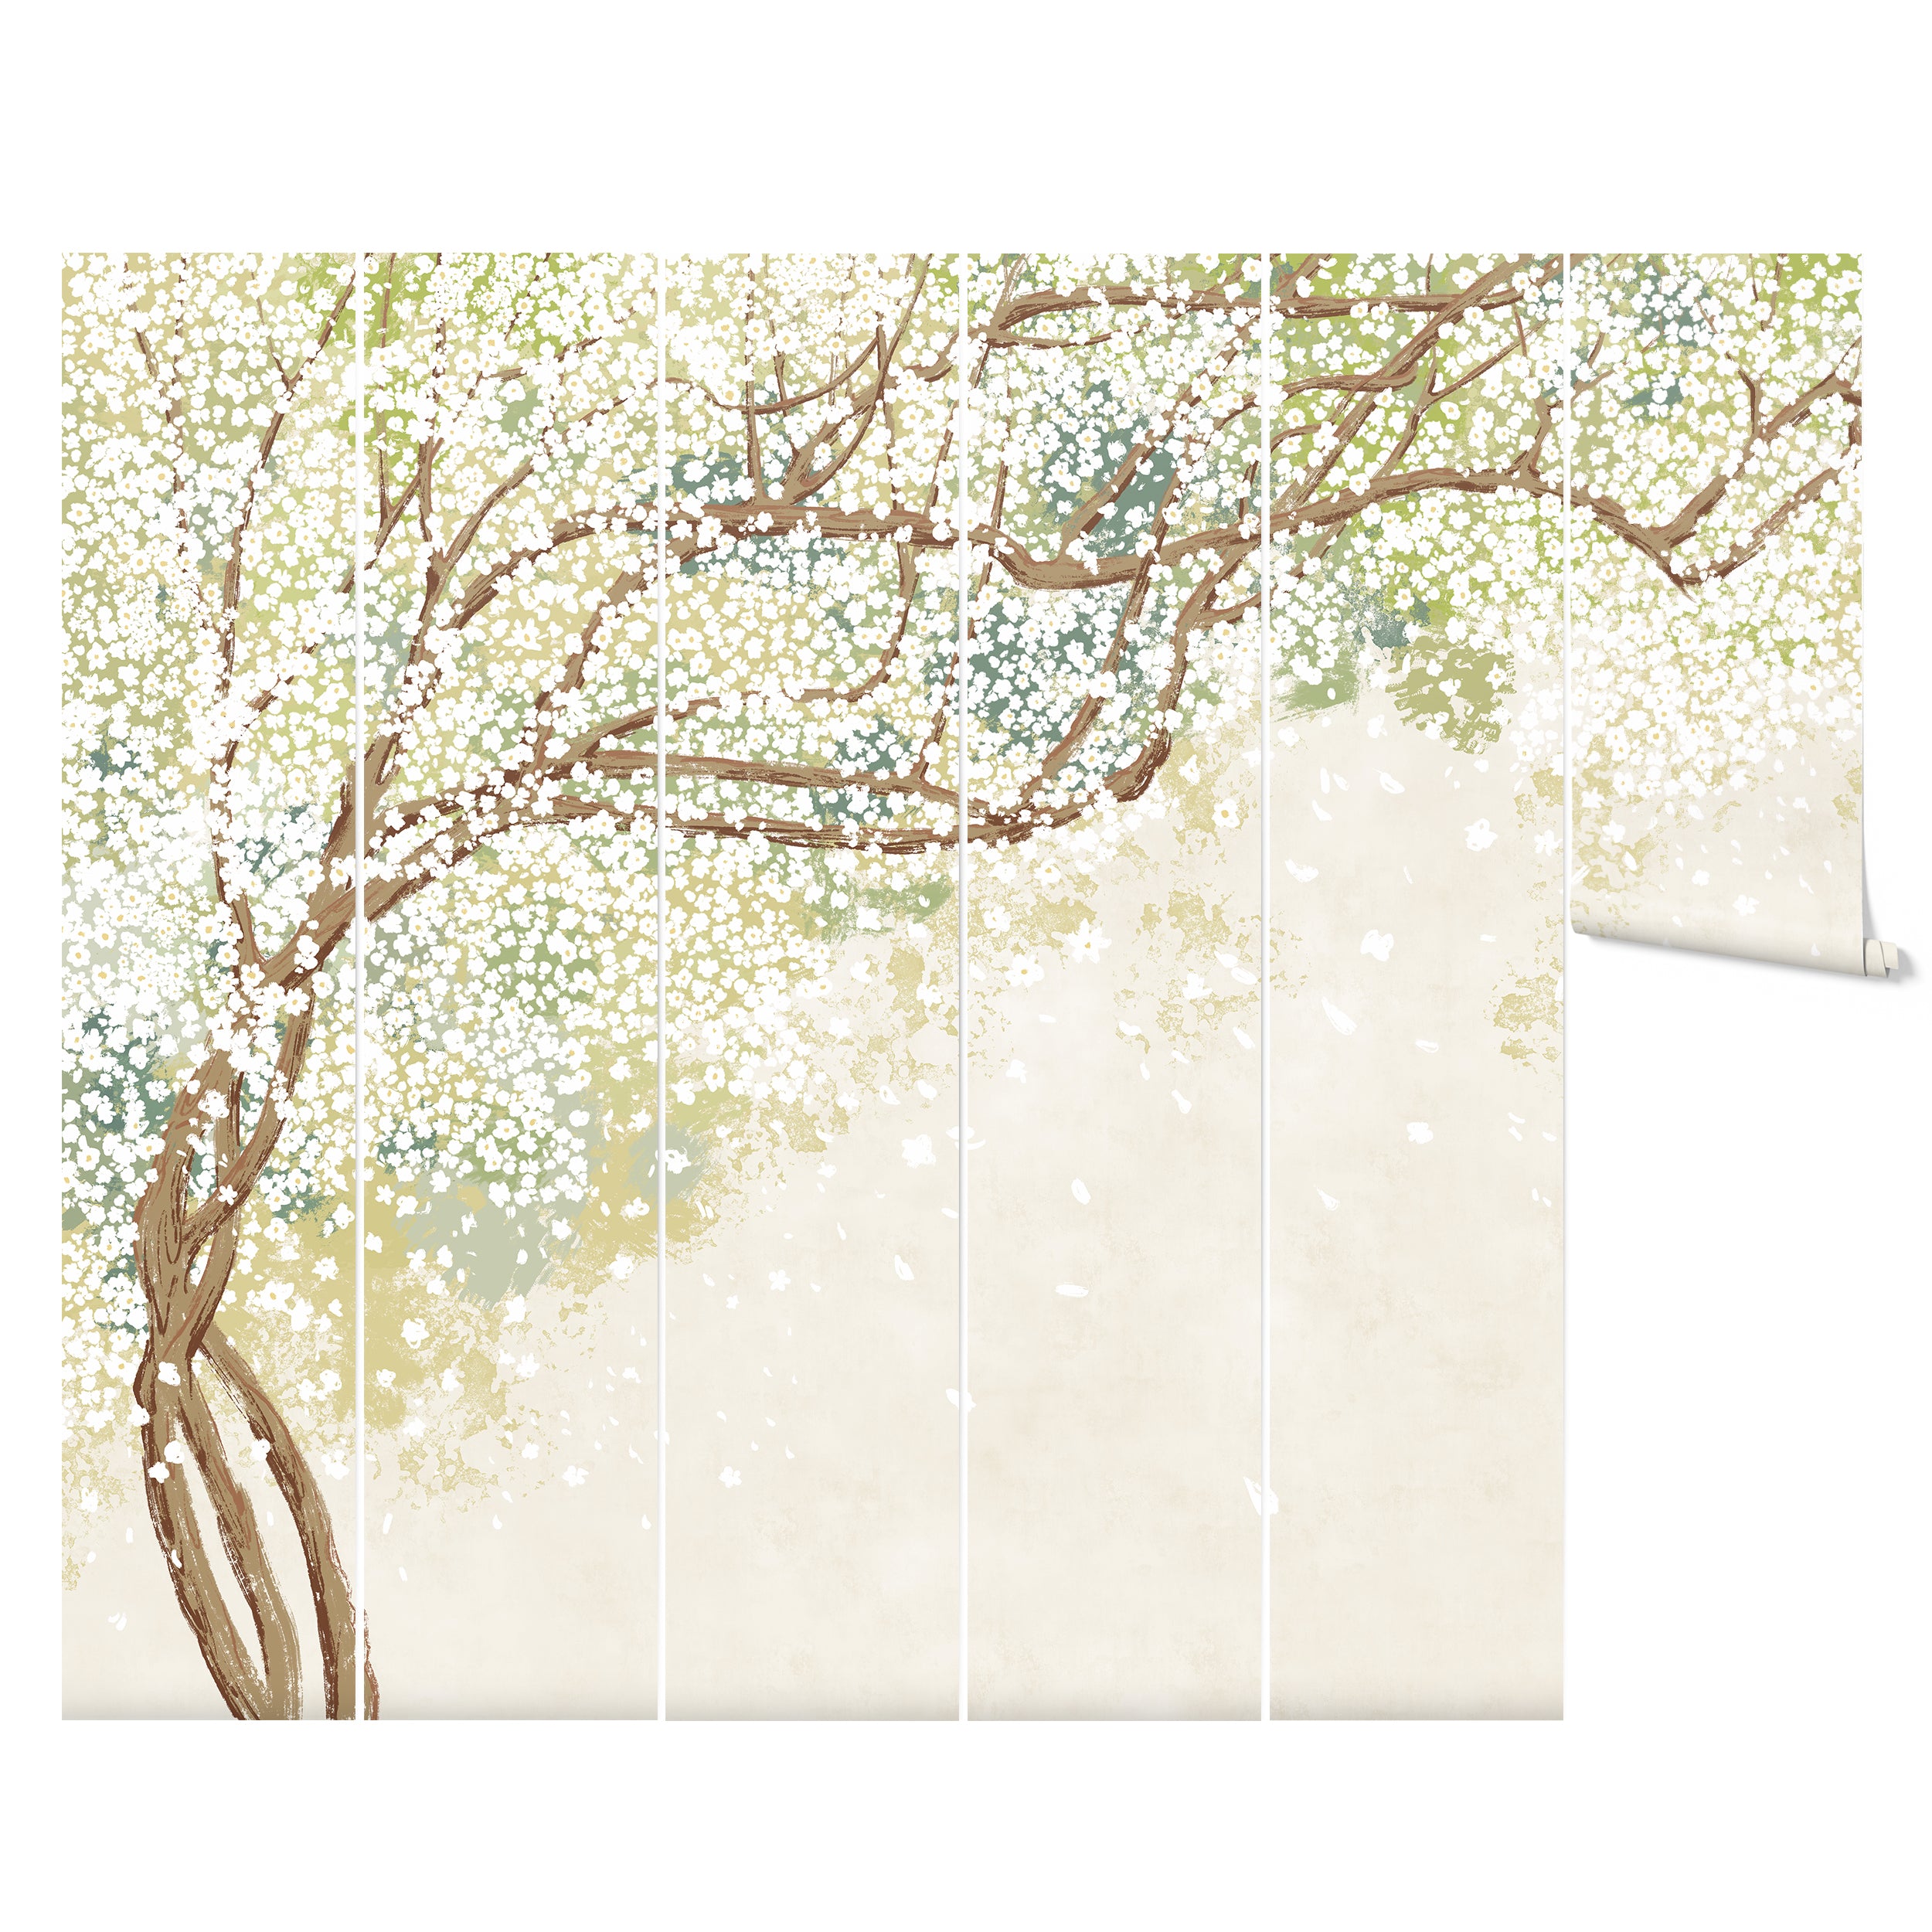 A roll of the Sakura Serenade mural wallpaper unrolled to display the full pattern. The design features cherry blossom branches with white flowers on a soft green and beige background, creating a tranquil and picturesque scene.